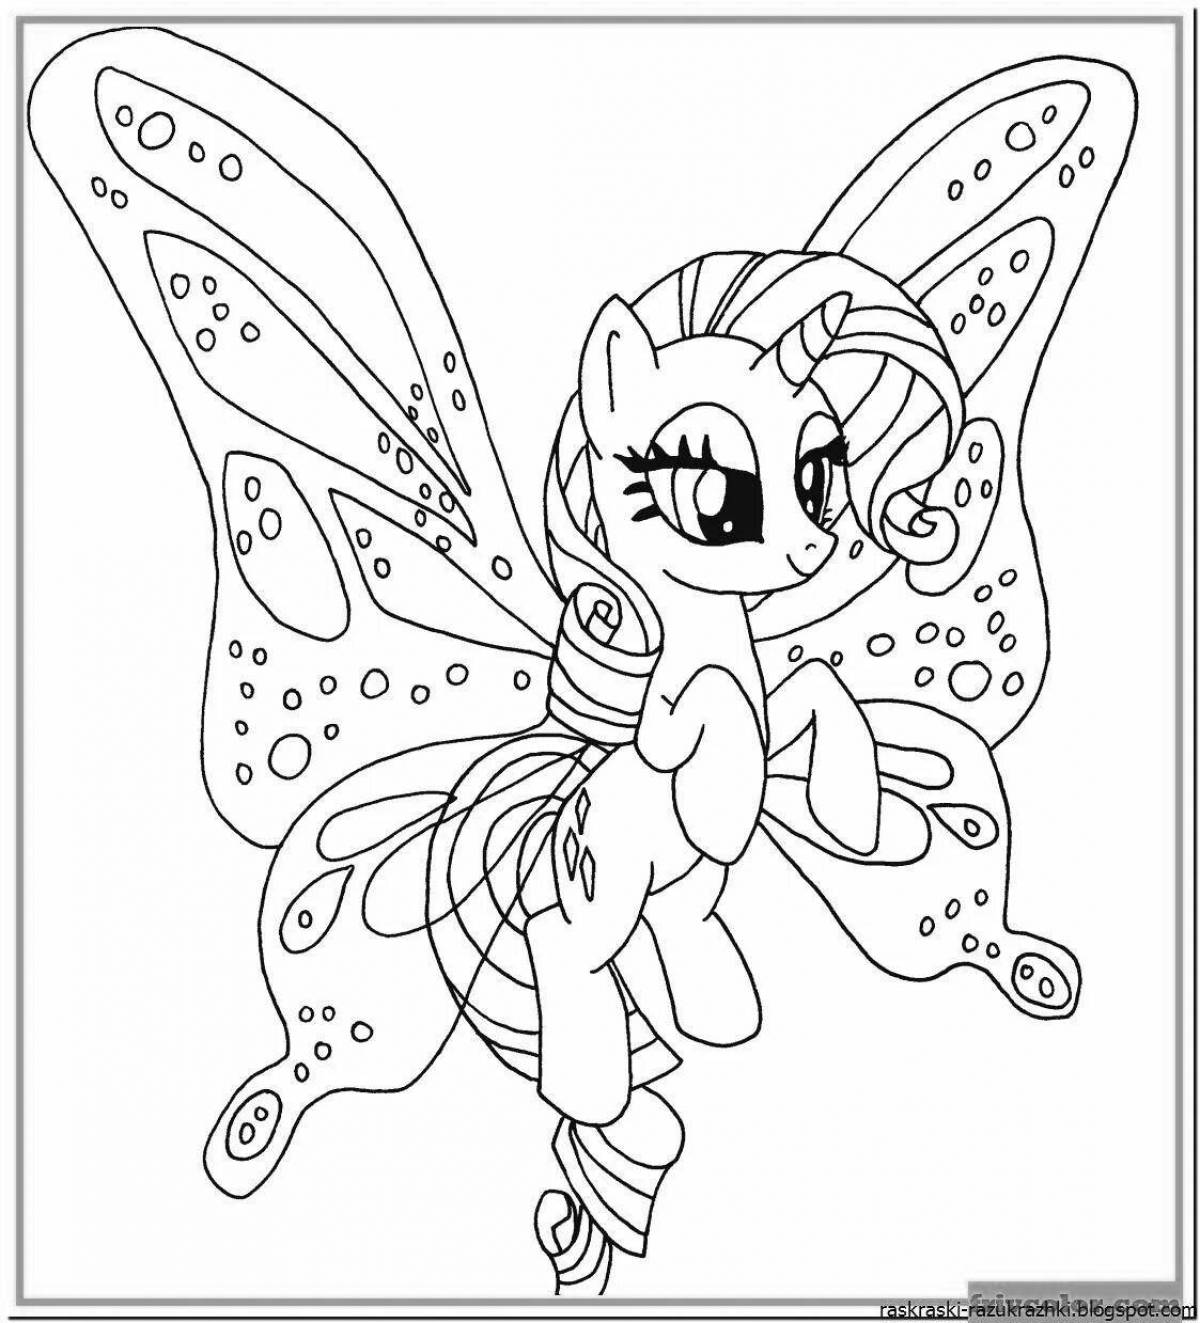 Adorable pony coloring book for girls 4-5 years old